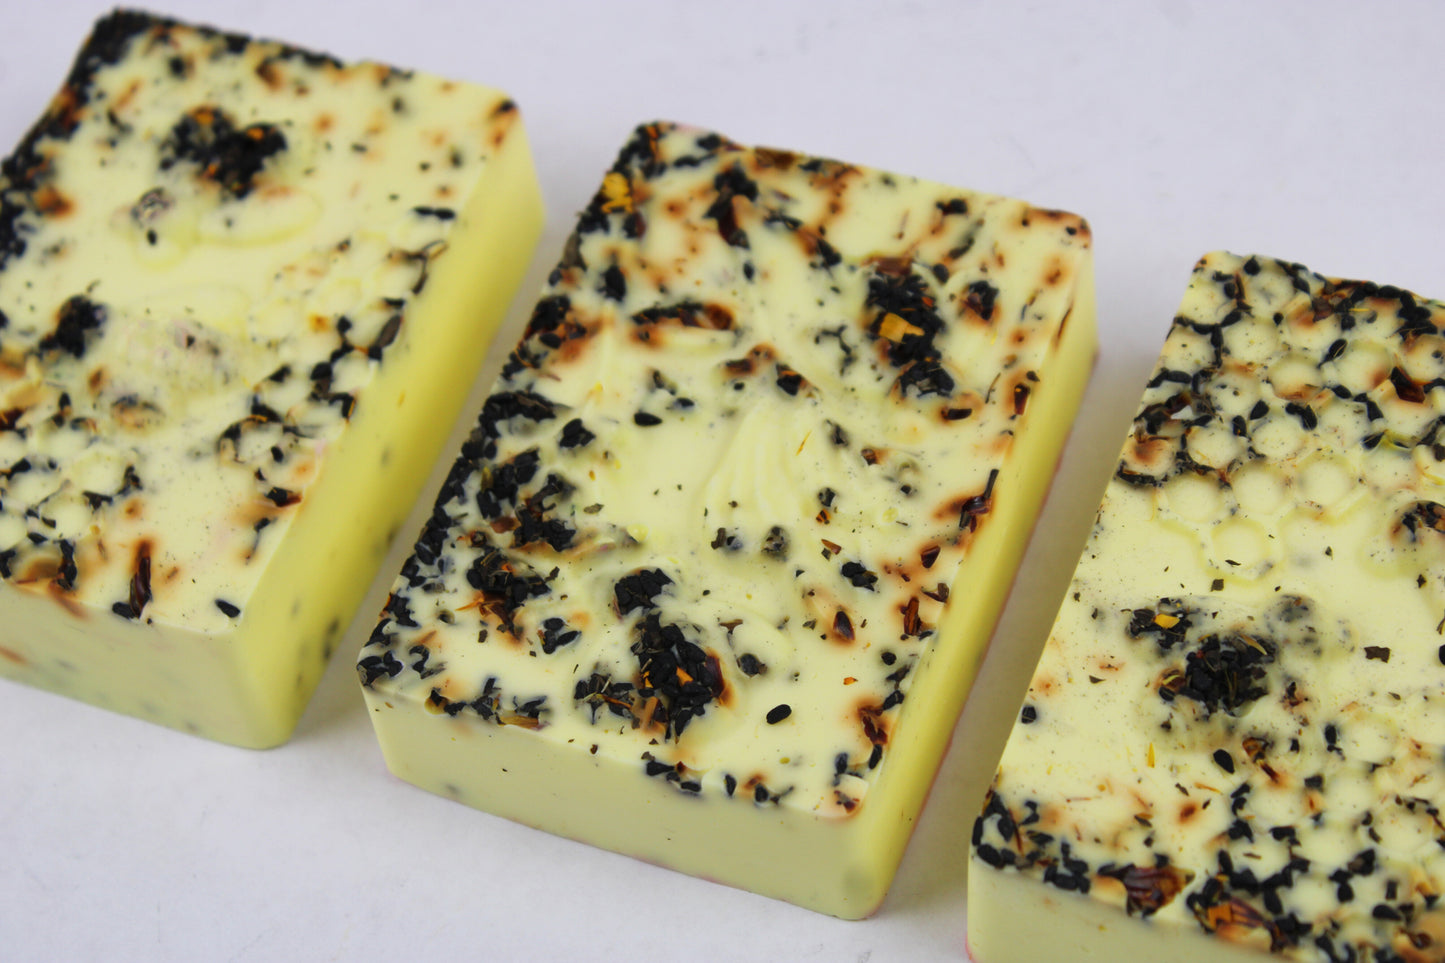 "The Bee's Knees" All-Natural Soap